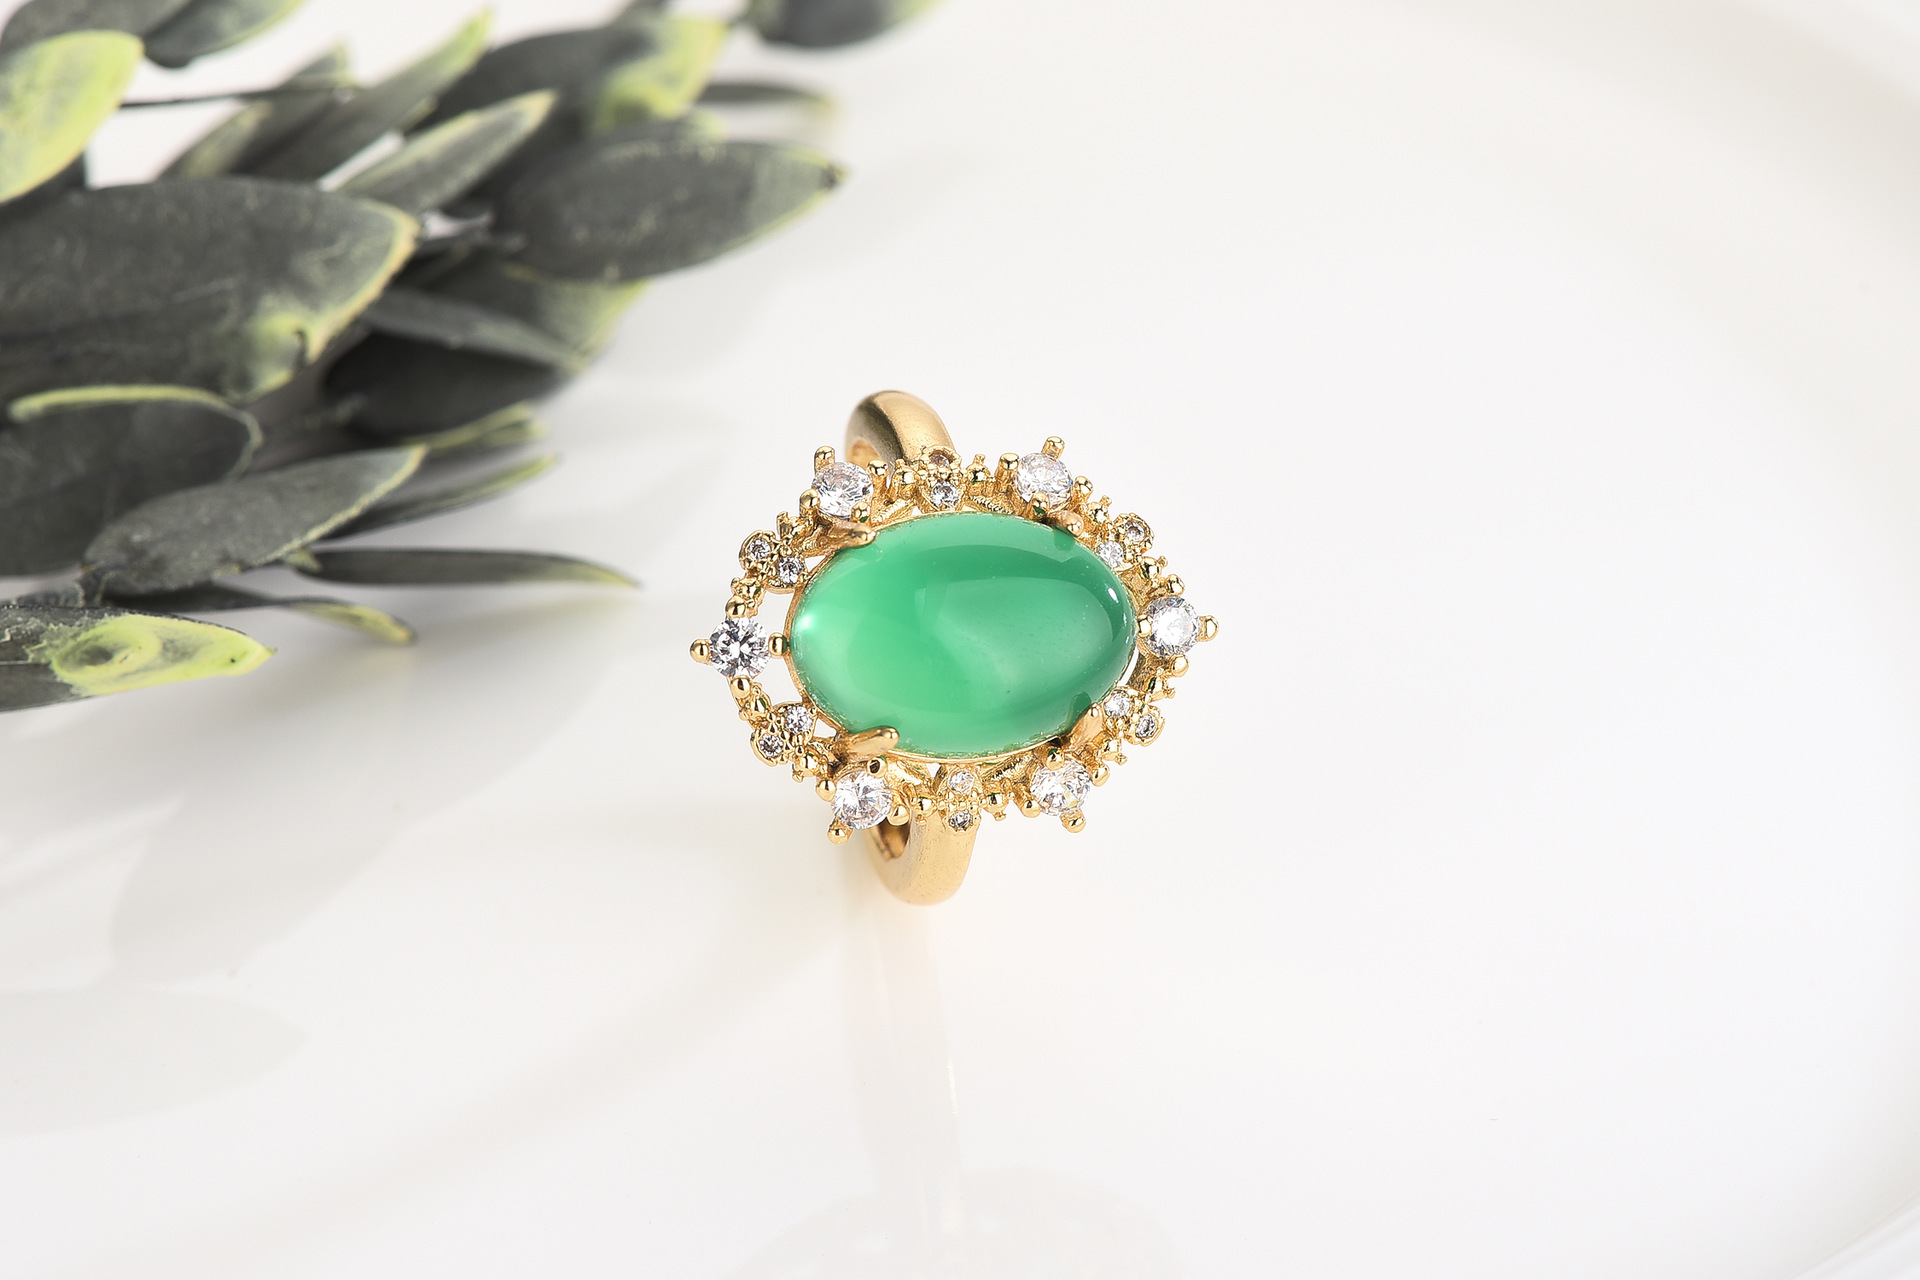 1:10x14mm ring (including chrysoprase) with adjustable opening